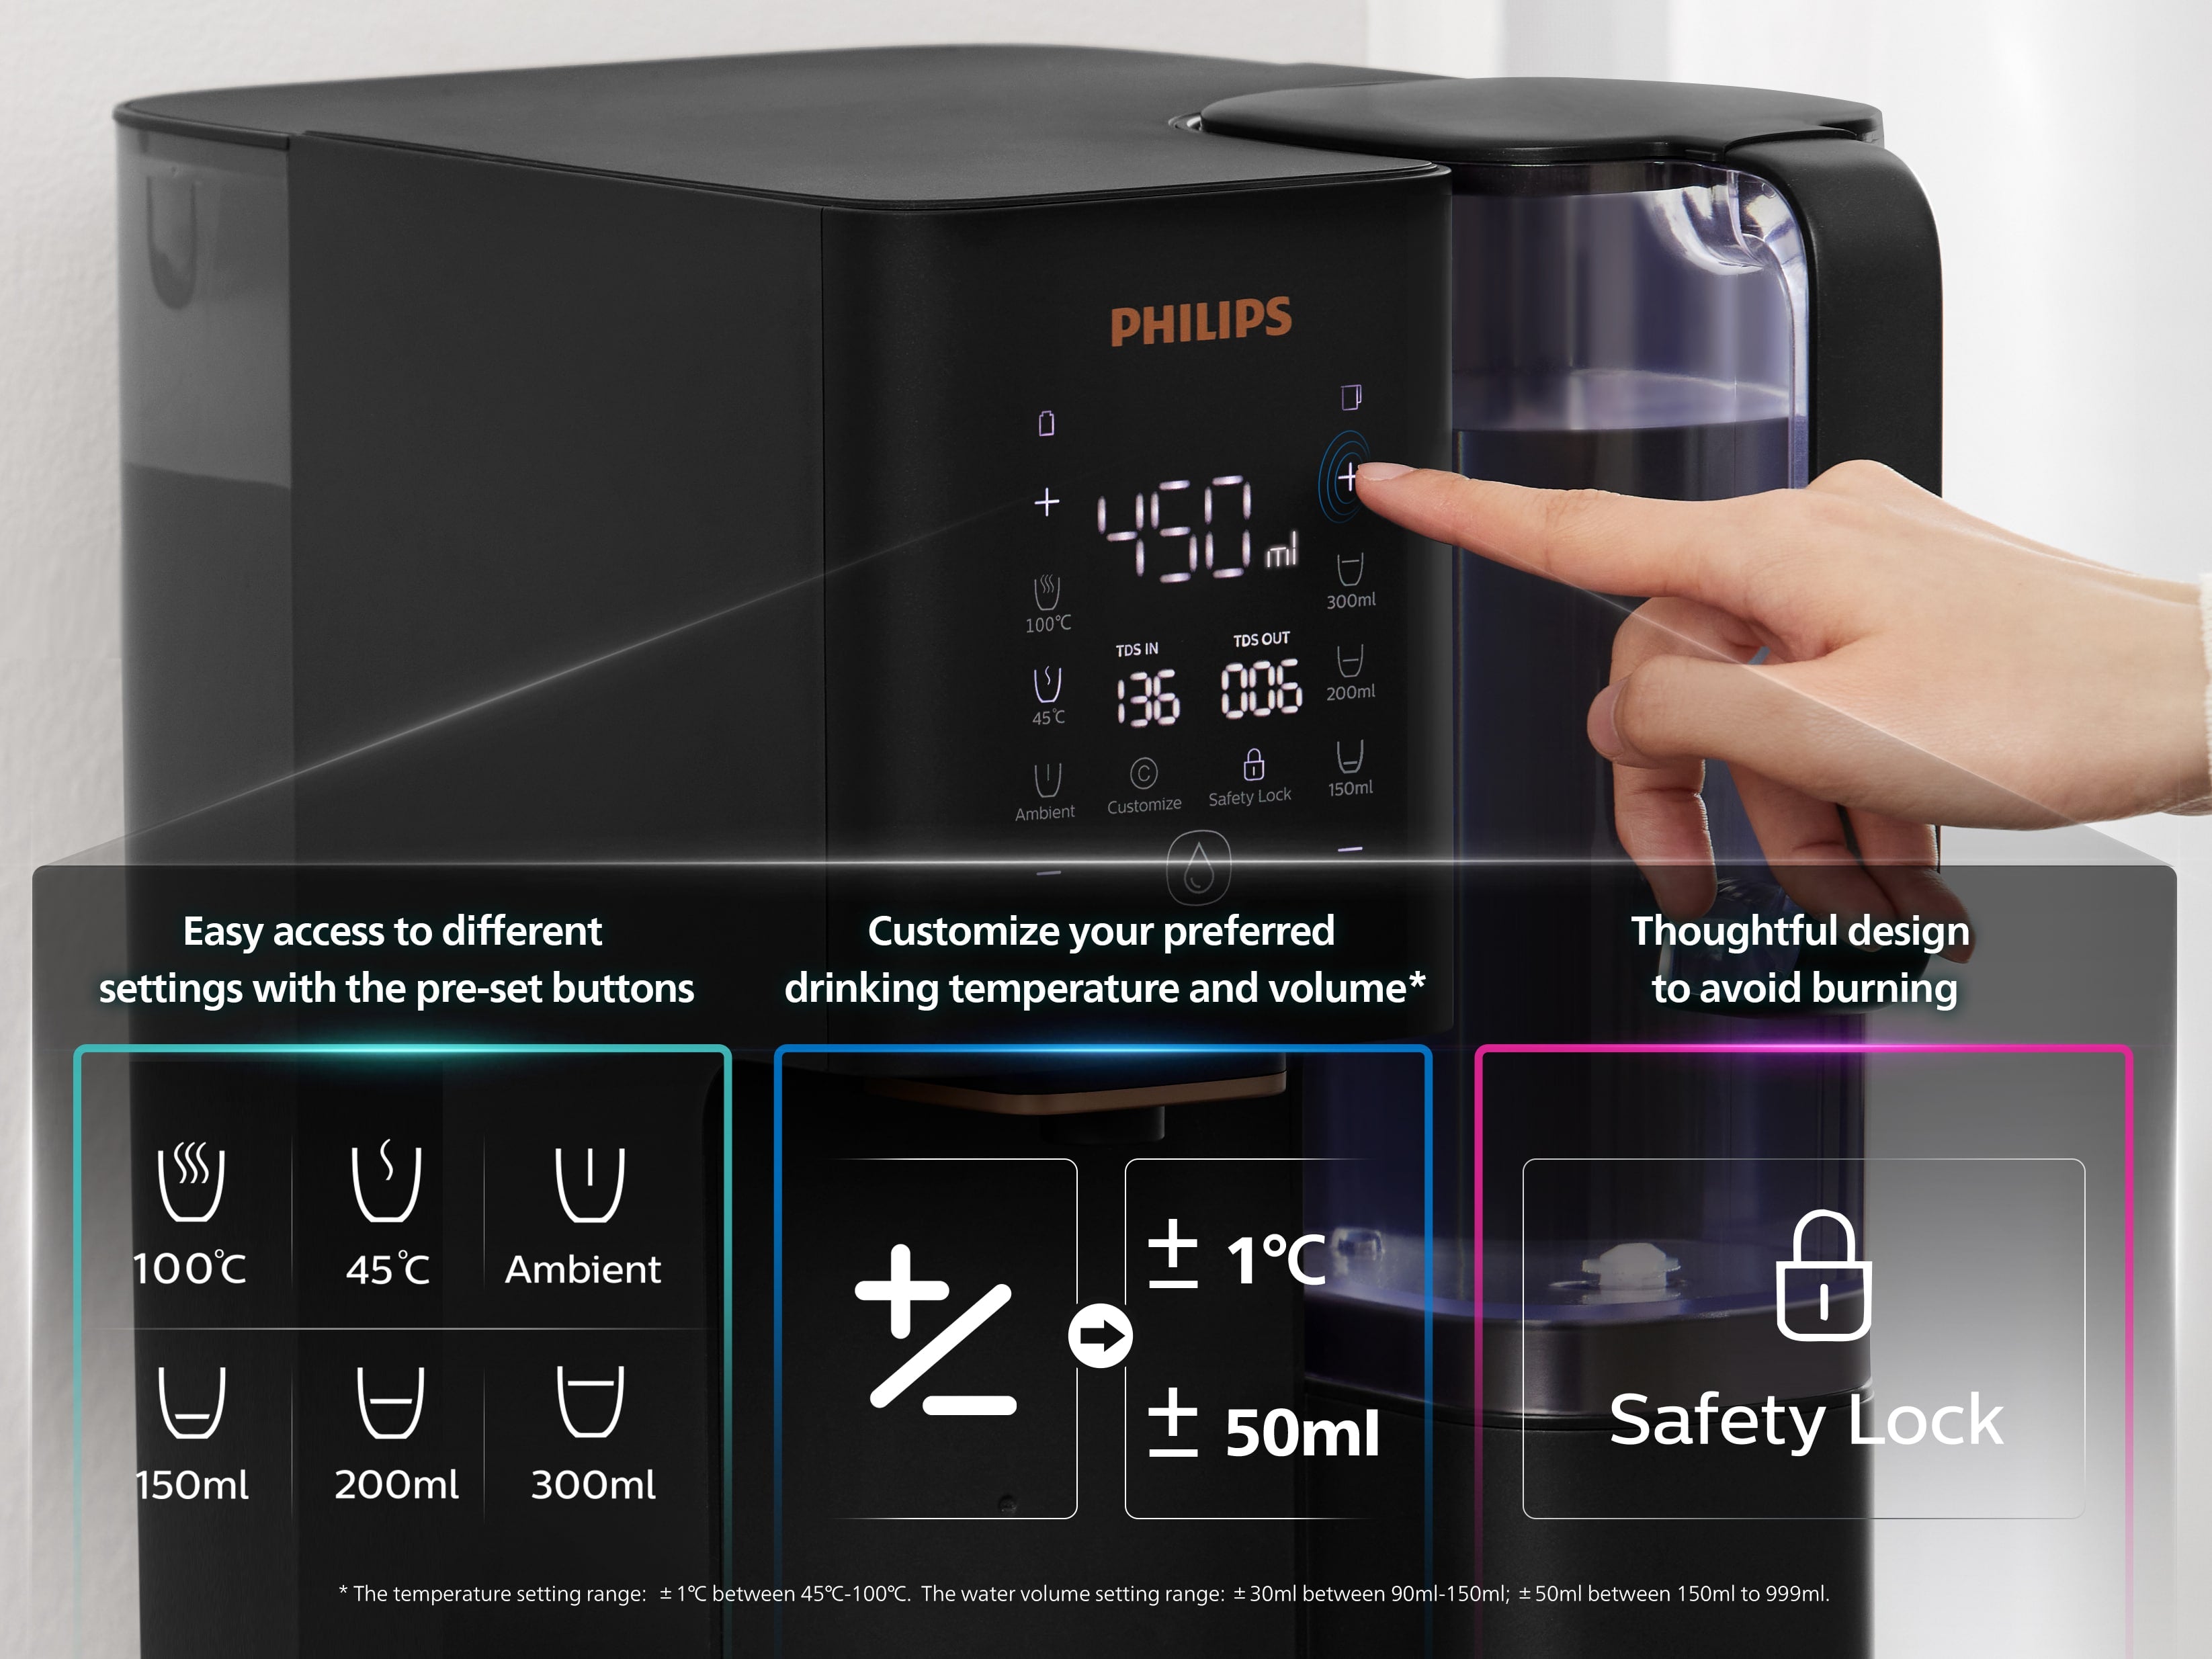 Philips Aquaporin Reverse Osmosis Water Station, with instant heating ADD6920BK/79